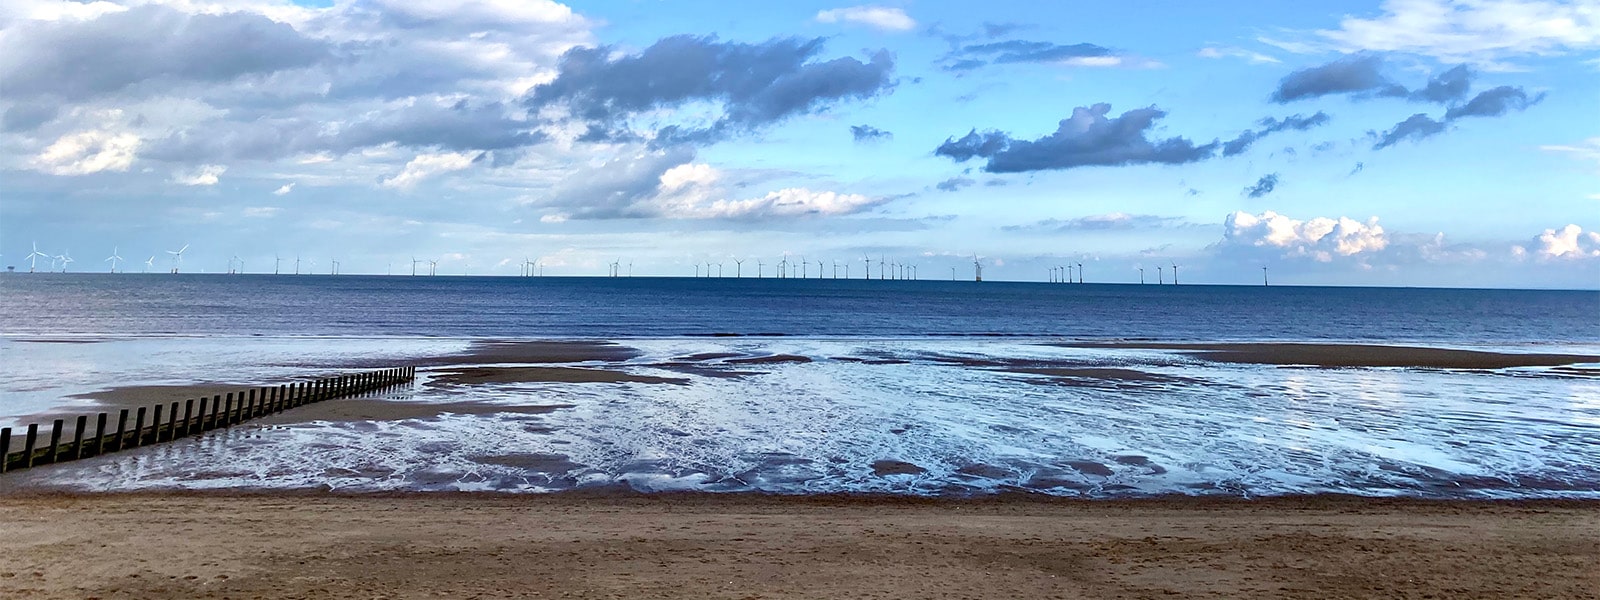 Beach with wind farm in distance